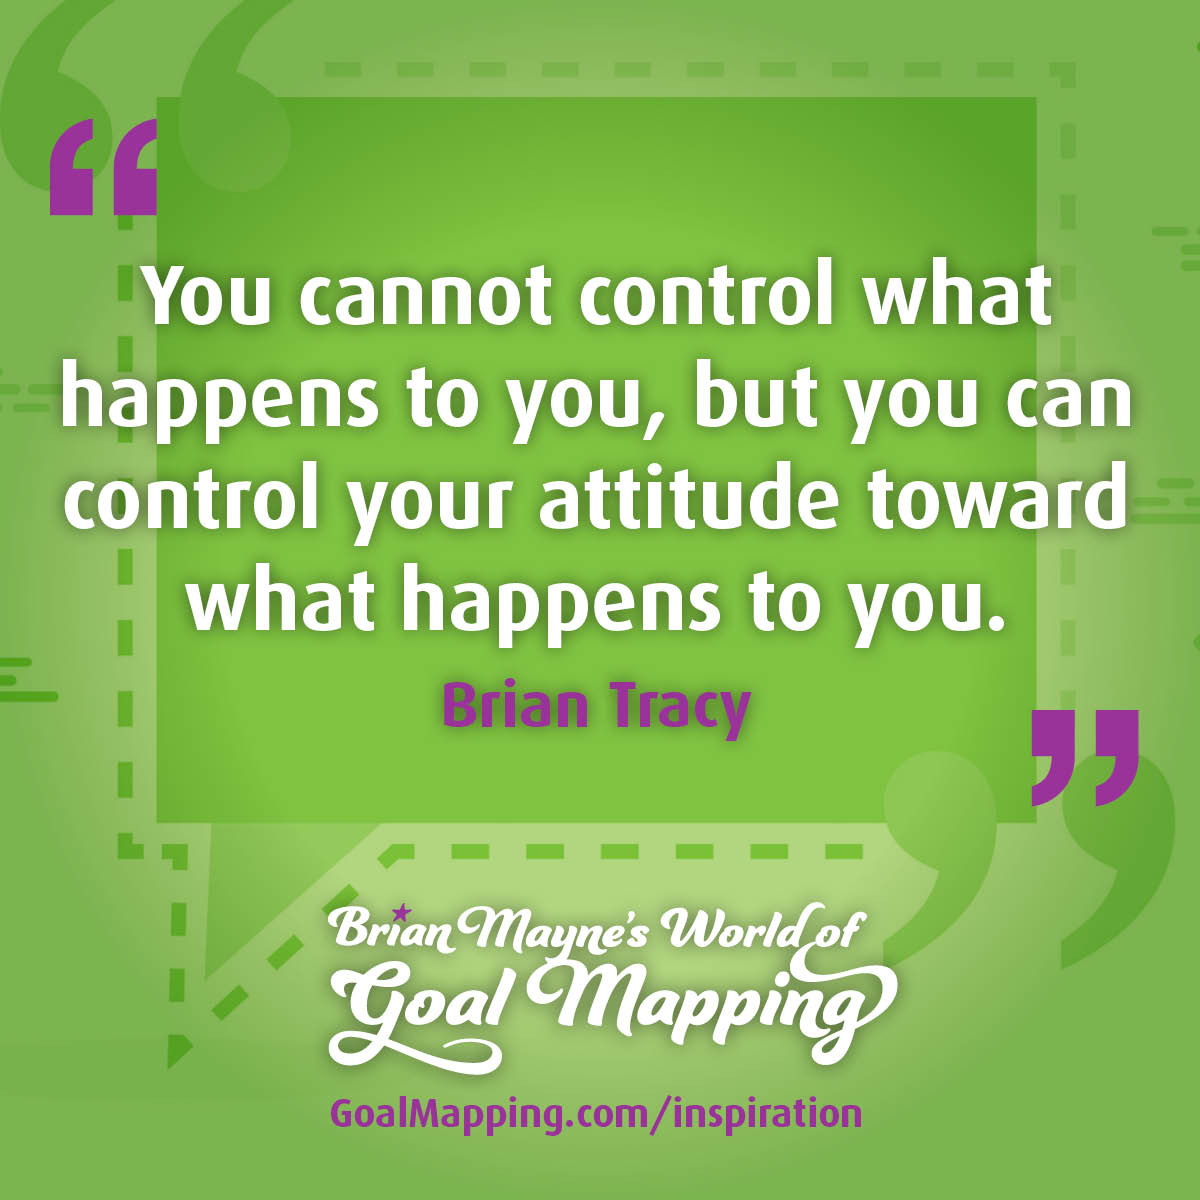 "You cannot control what happens to you, but you can control your attitude toward what happens to you." Brian Tracy